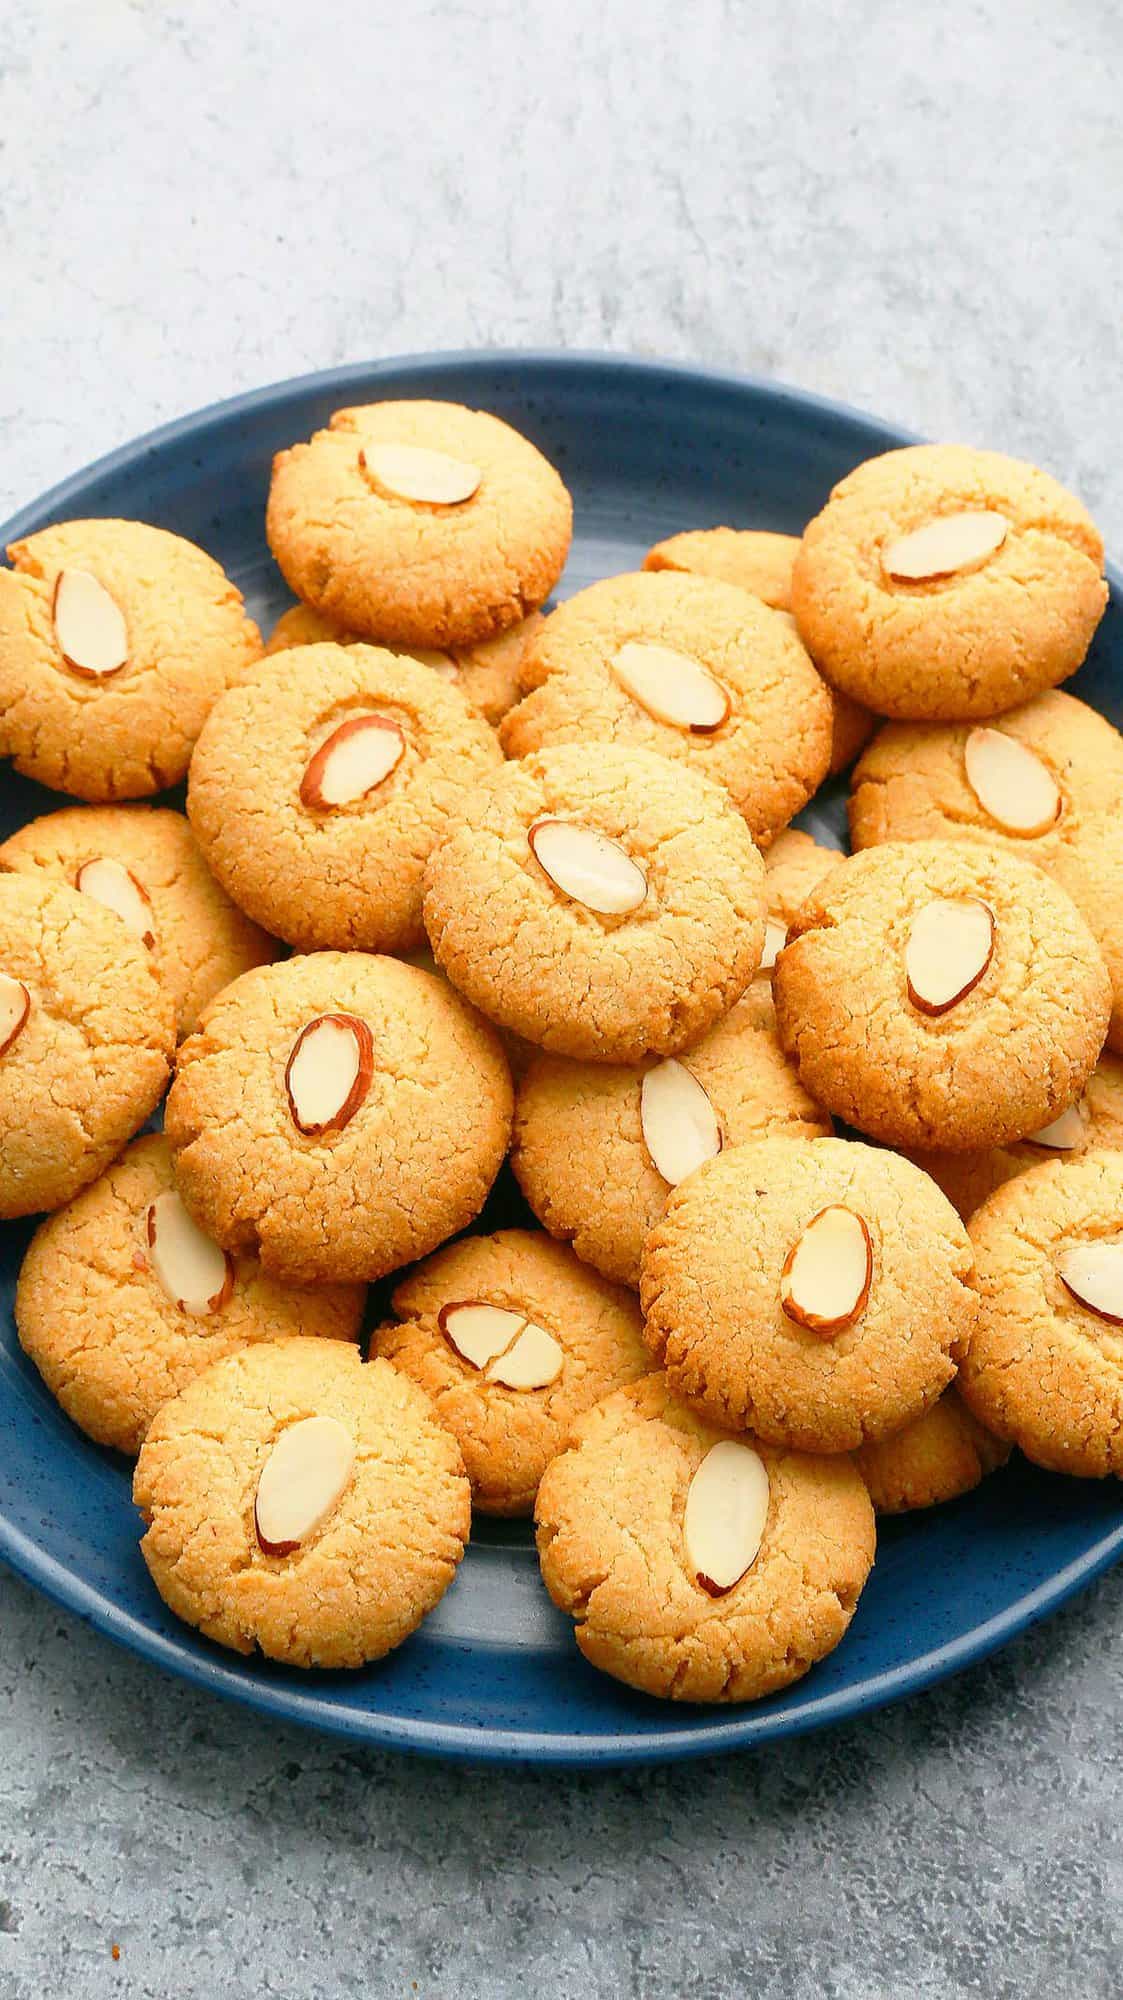 baked almond flour cookies on a large blue plate.